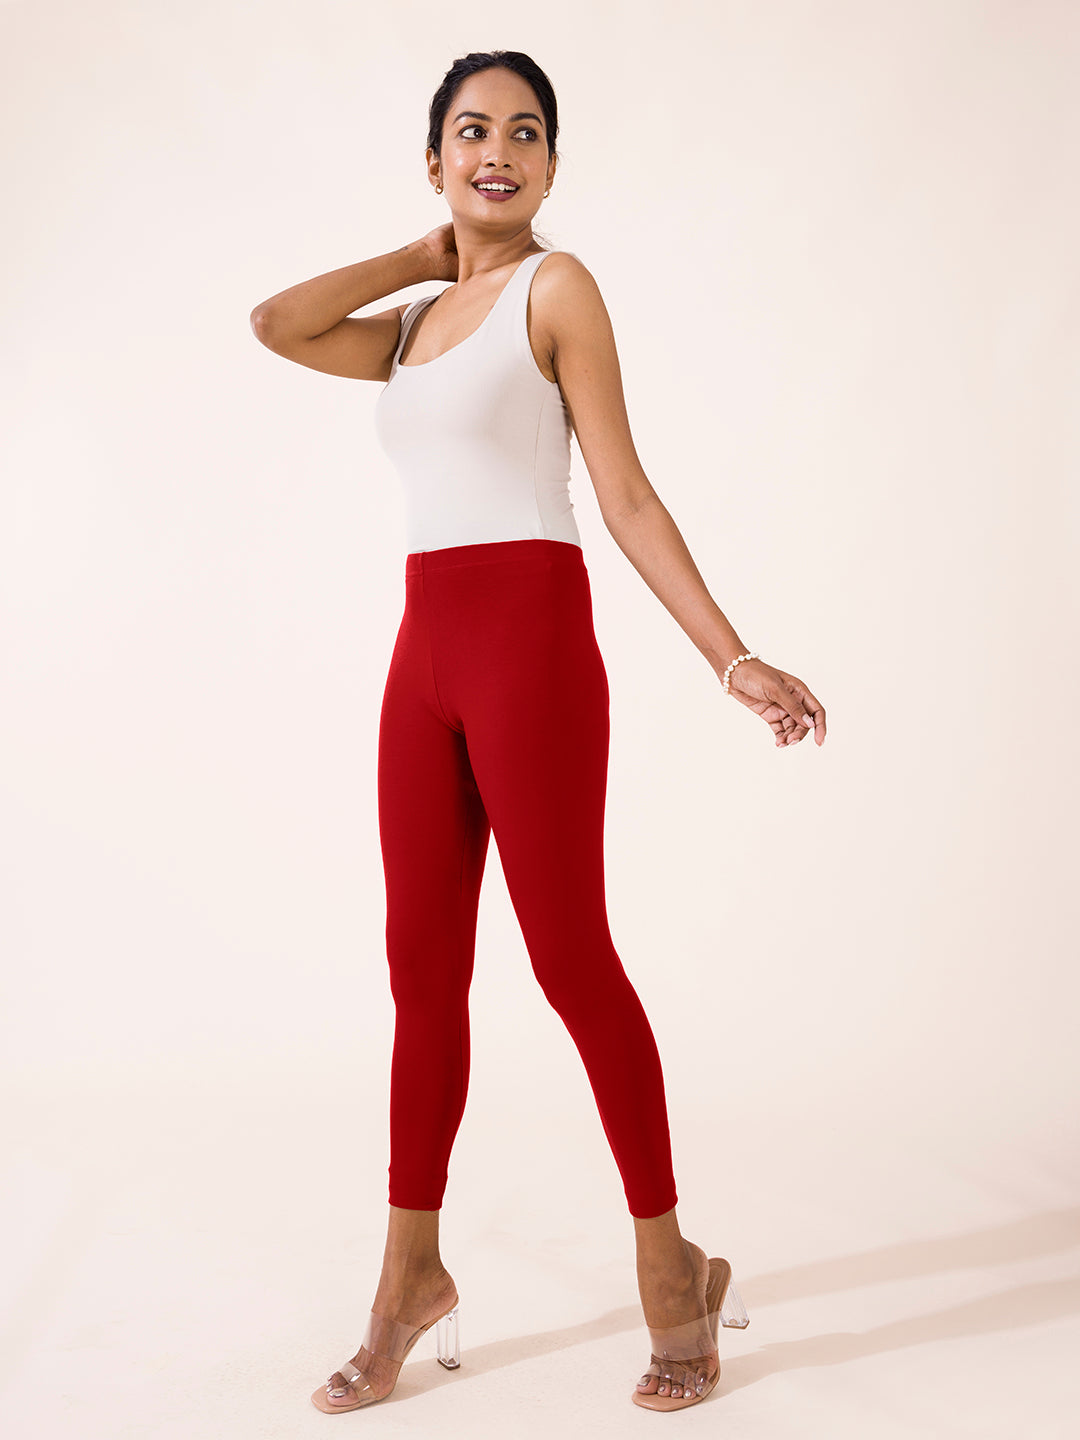 View of Slim Woman Body Lower Part Wearing Red Tights and High